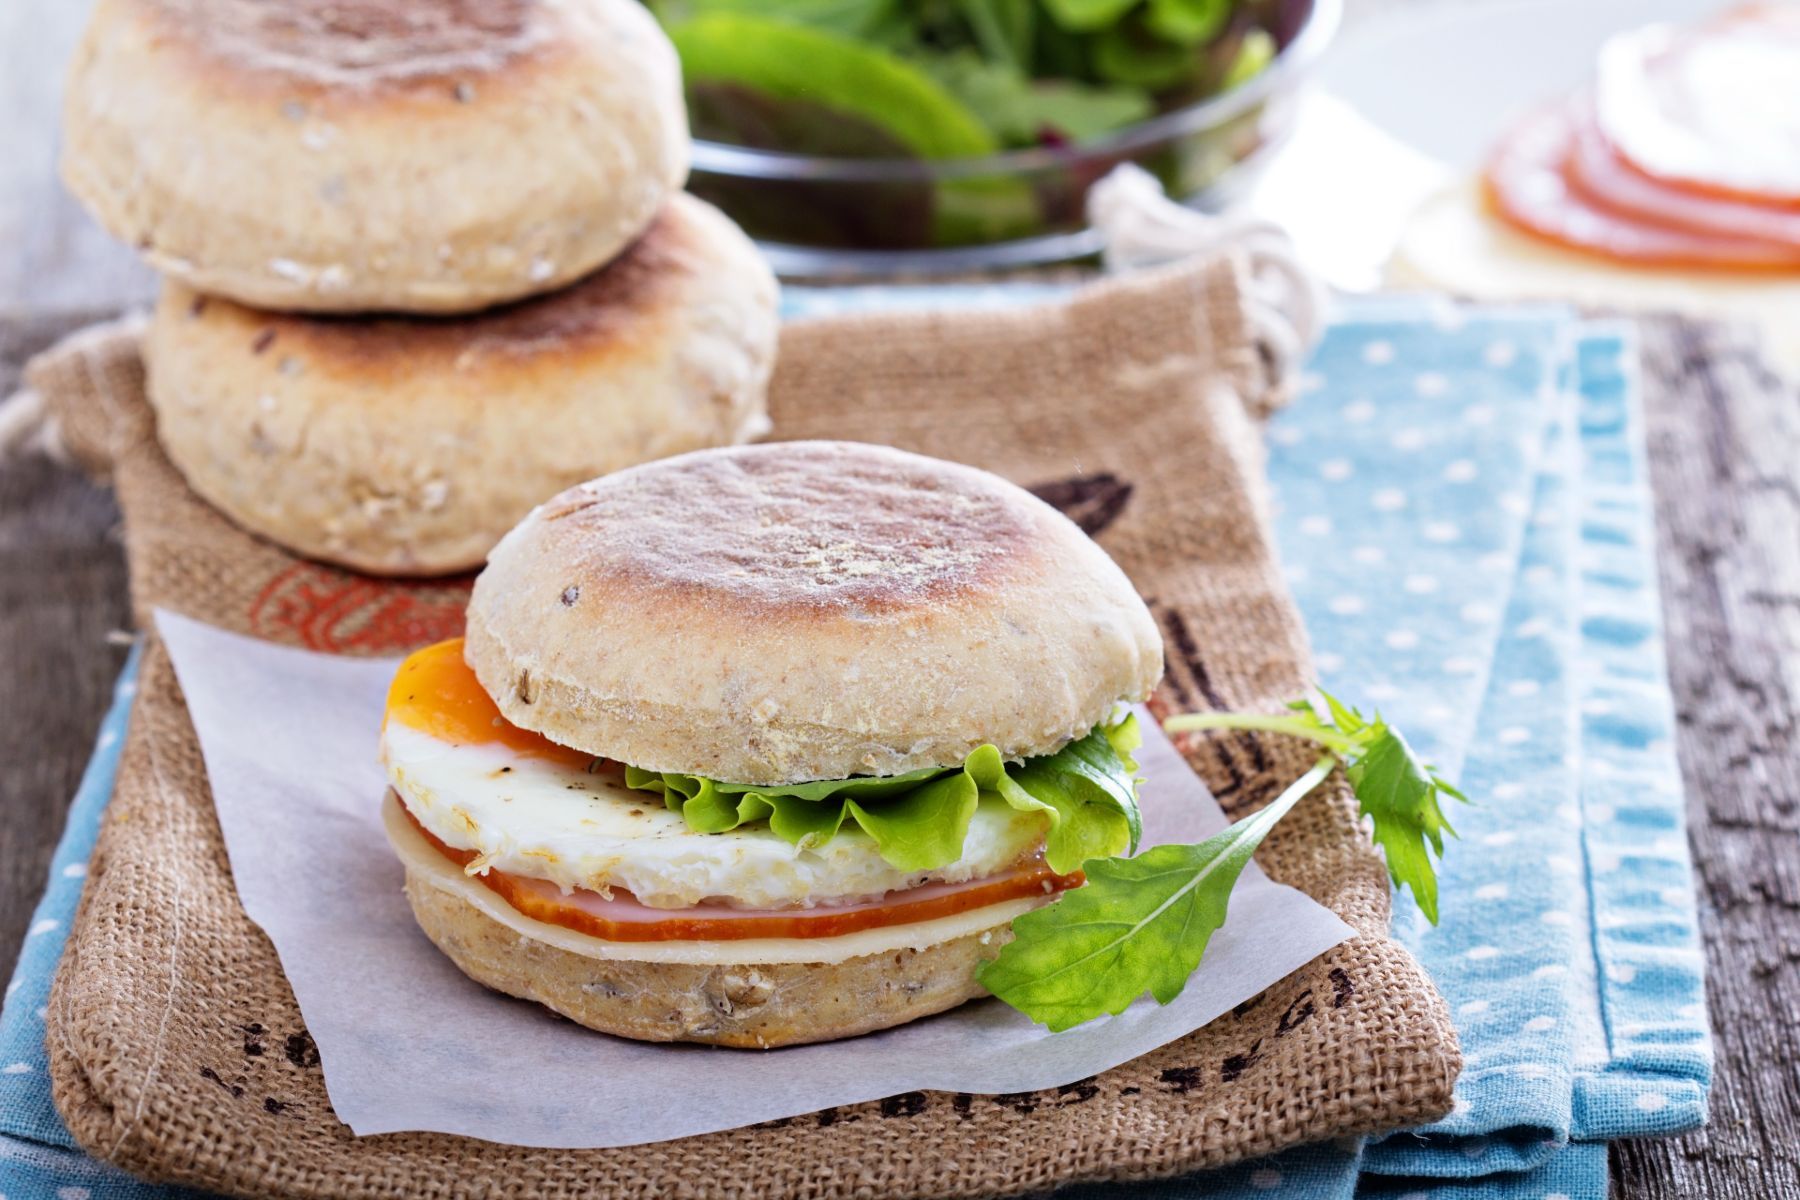 English muffin breakfast sandwich sits near two other English muffins on a table with cloth napkins - whole-grain foods